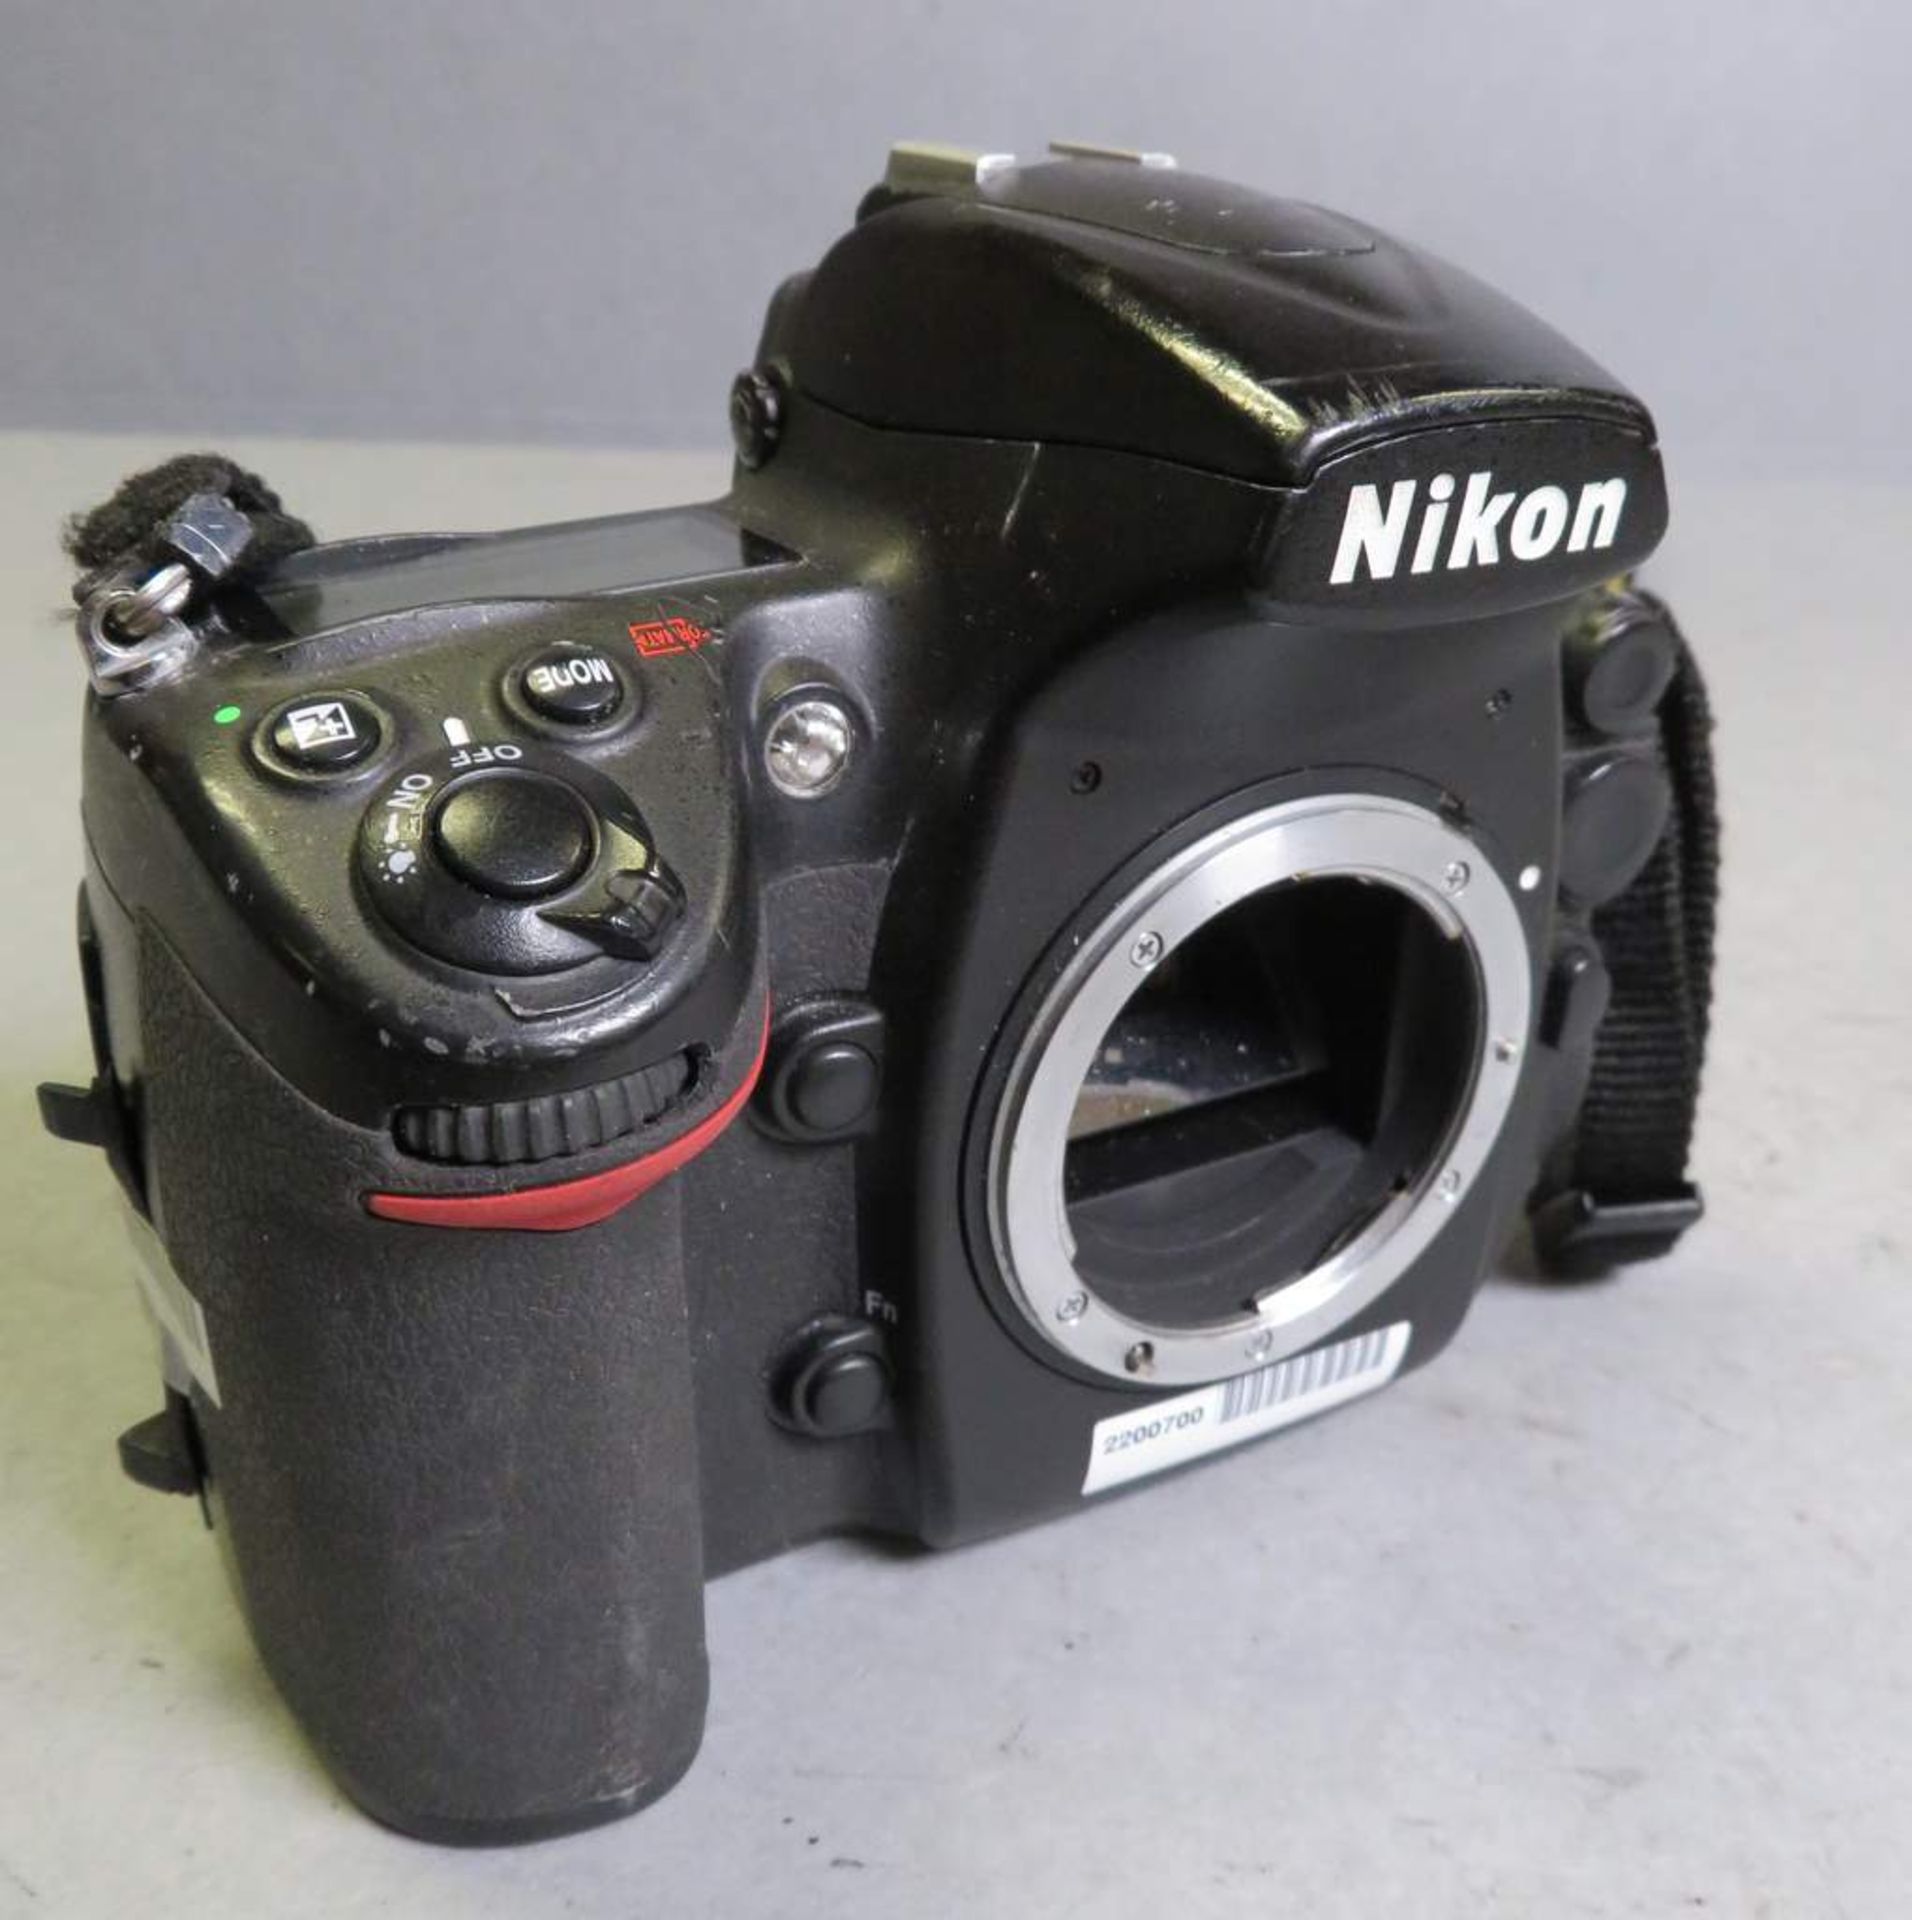 Nikon D700 Camera body - no battery or accessories - Image 2 of 6